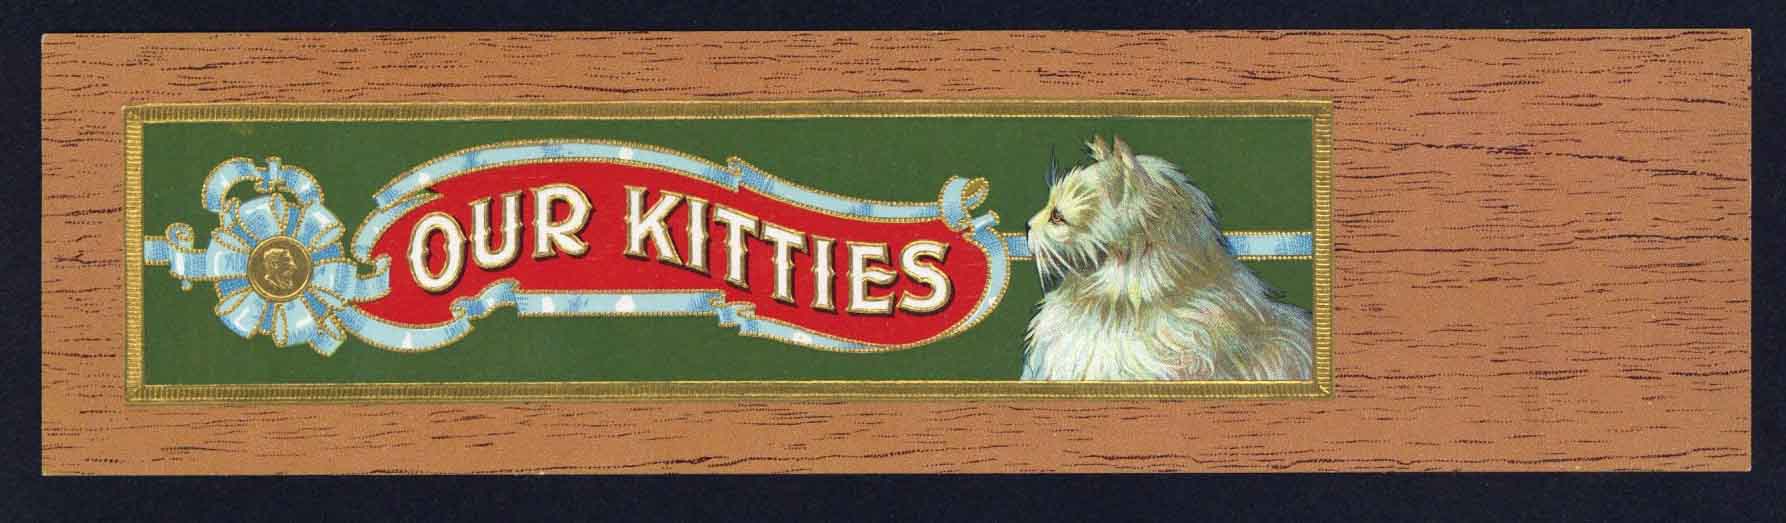 Our Kitties Brand Outer Tag Cigar Box Label